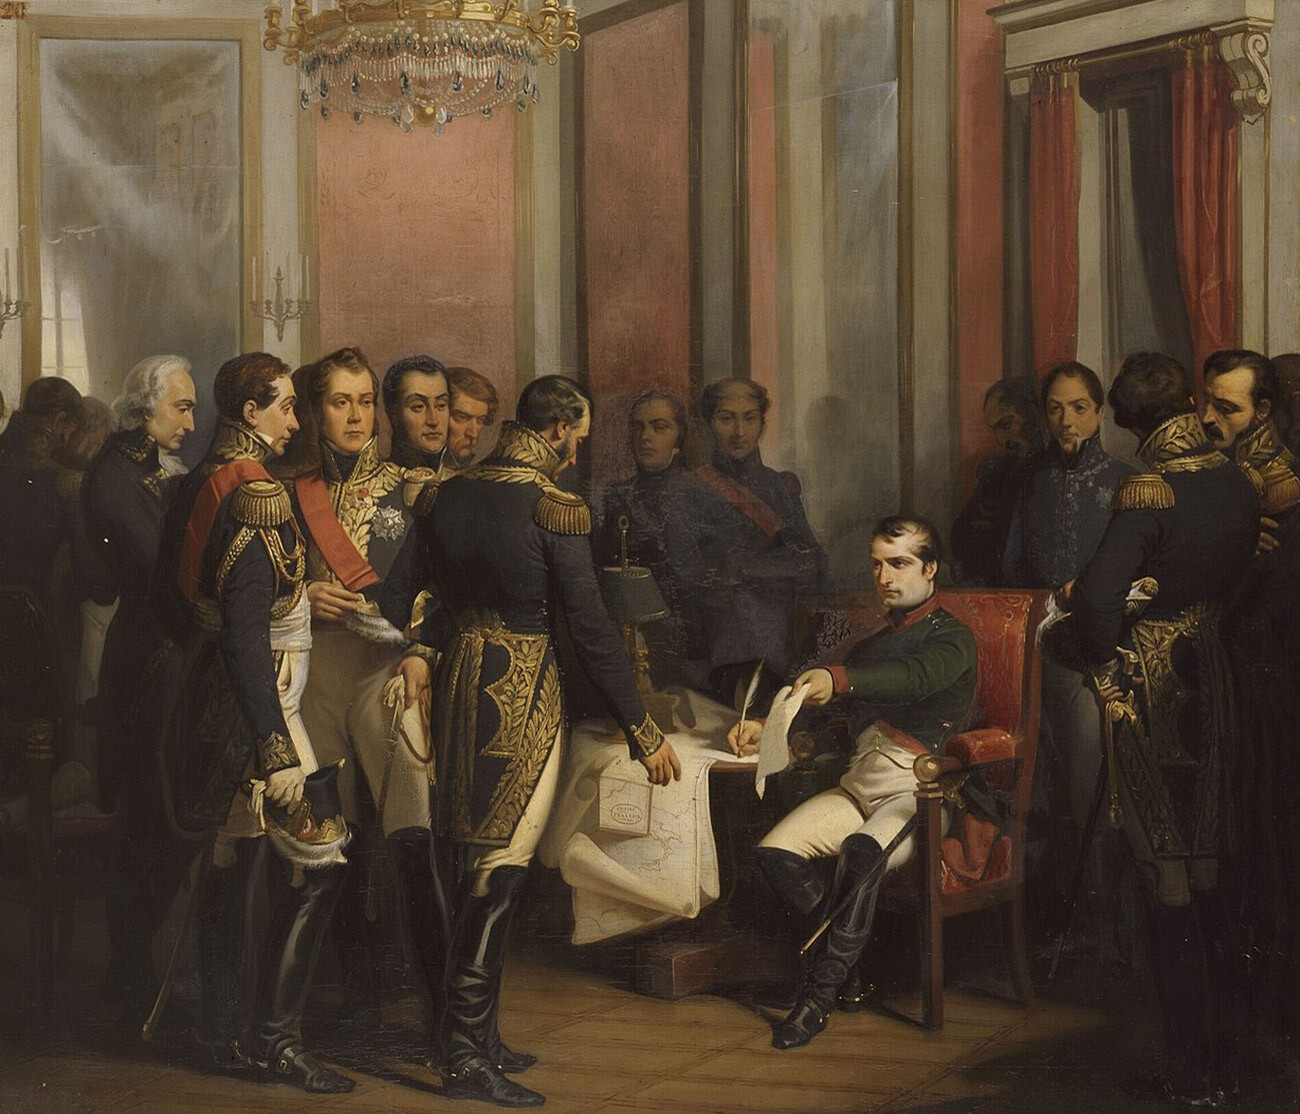 Abdication of Napoleon at Fontainebleau.